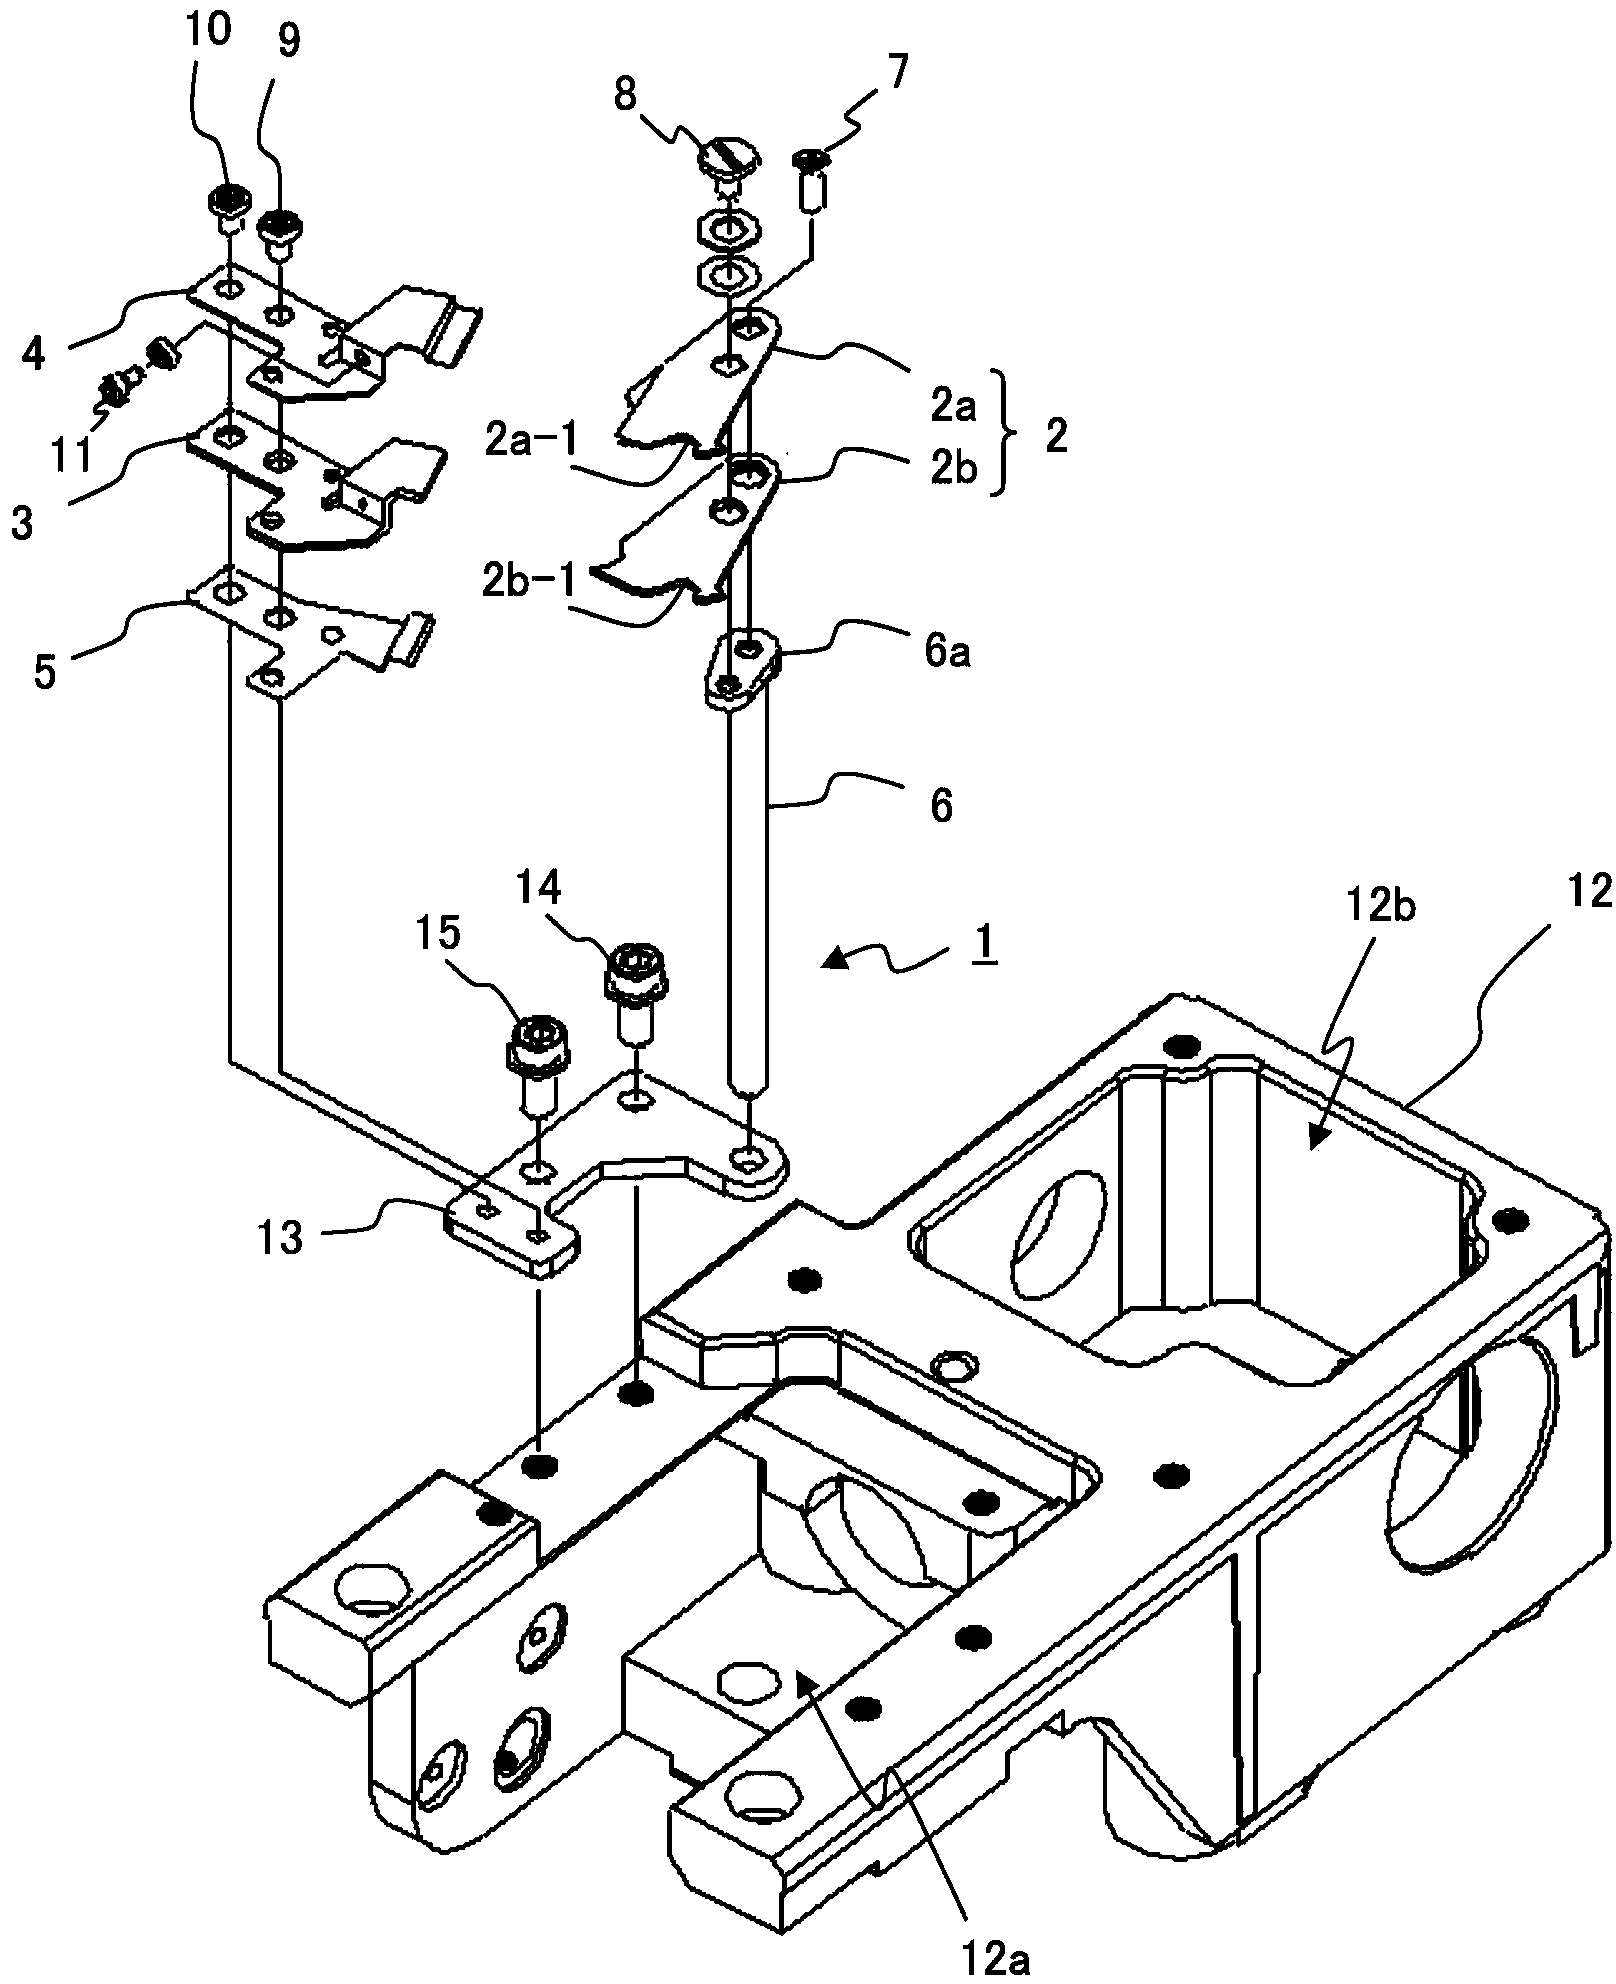 A line cutting device and a sewing machine